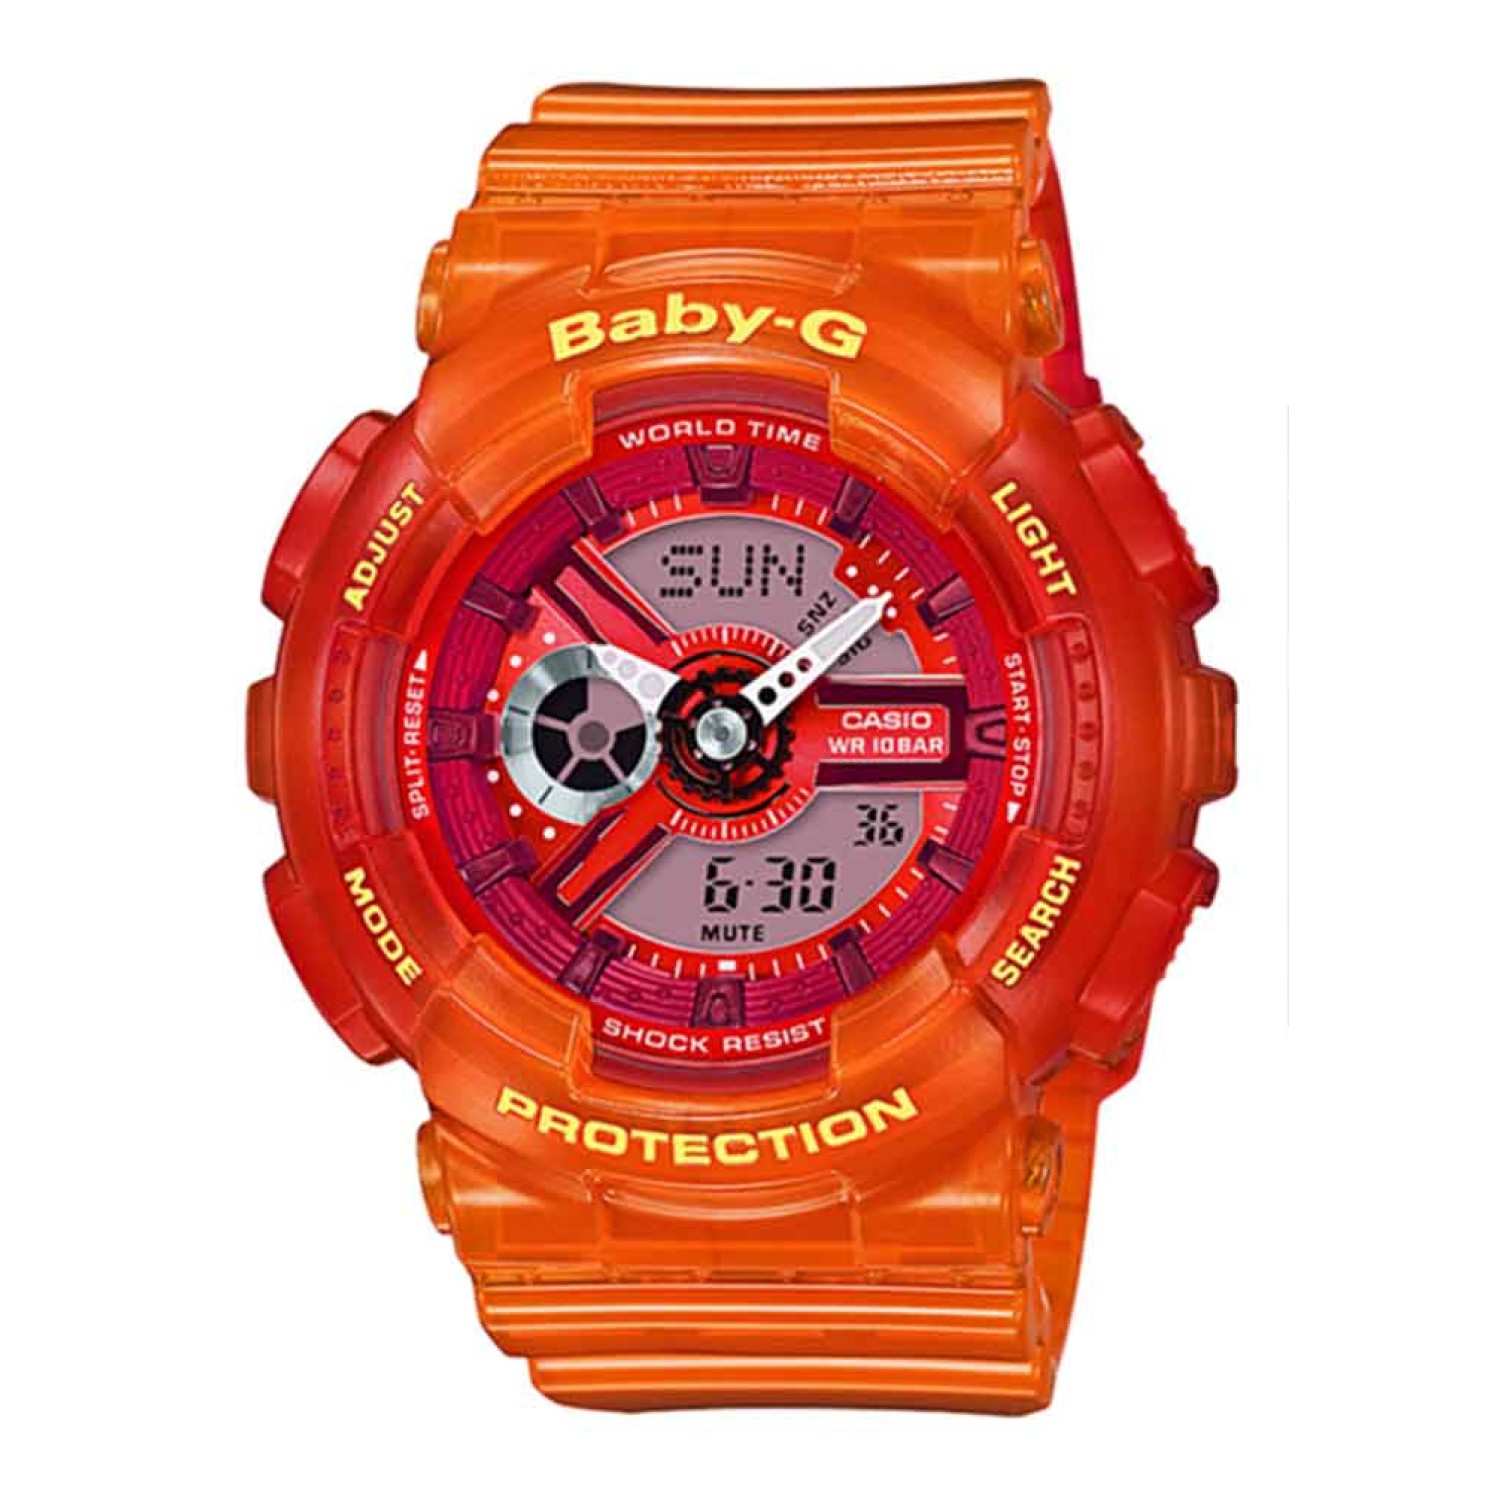 BA110JM-4A Baby-G Watch.   The BA110JM-1A additions to the popular BA-110 Series are done in semi-transparent colours that are so popular on the beach scene, and a mixed colour molding process produces a gradation pattern in the ca casio digital watches n